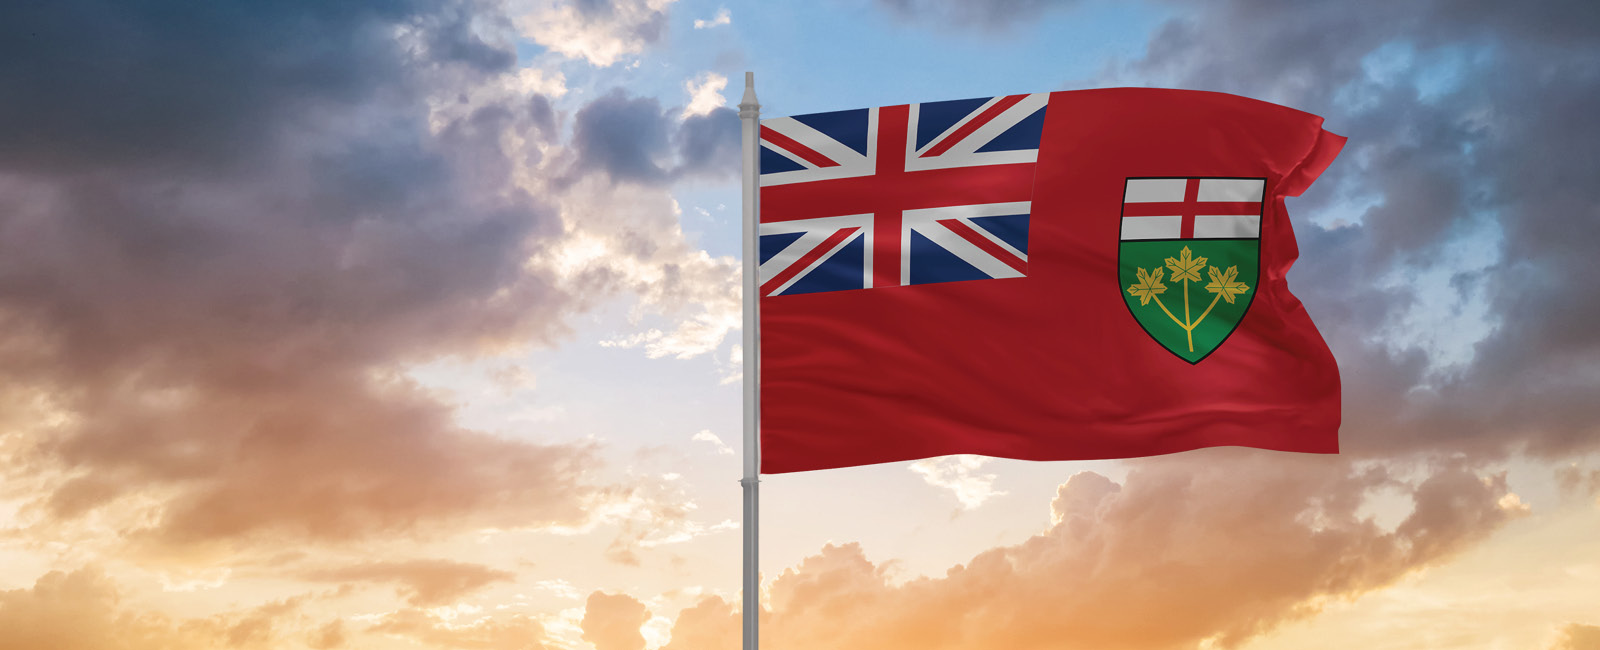 Ontario flag blowing in the sunset